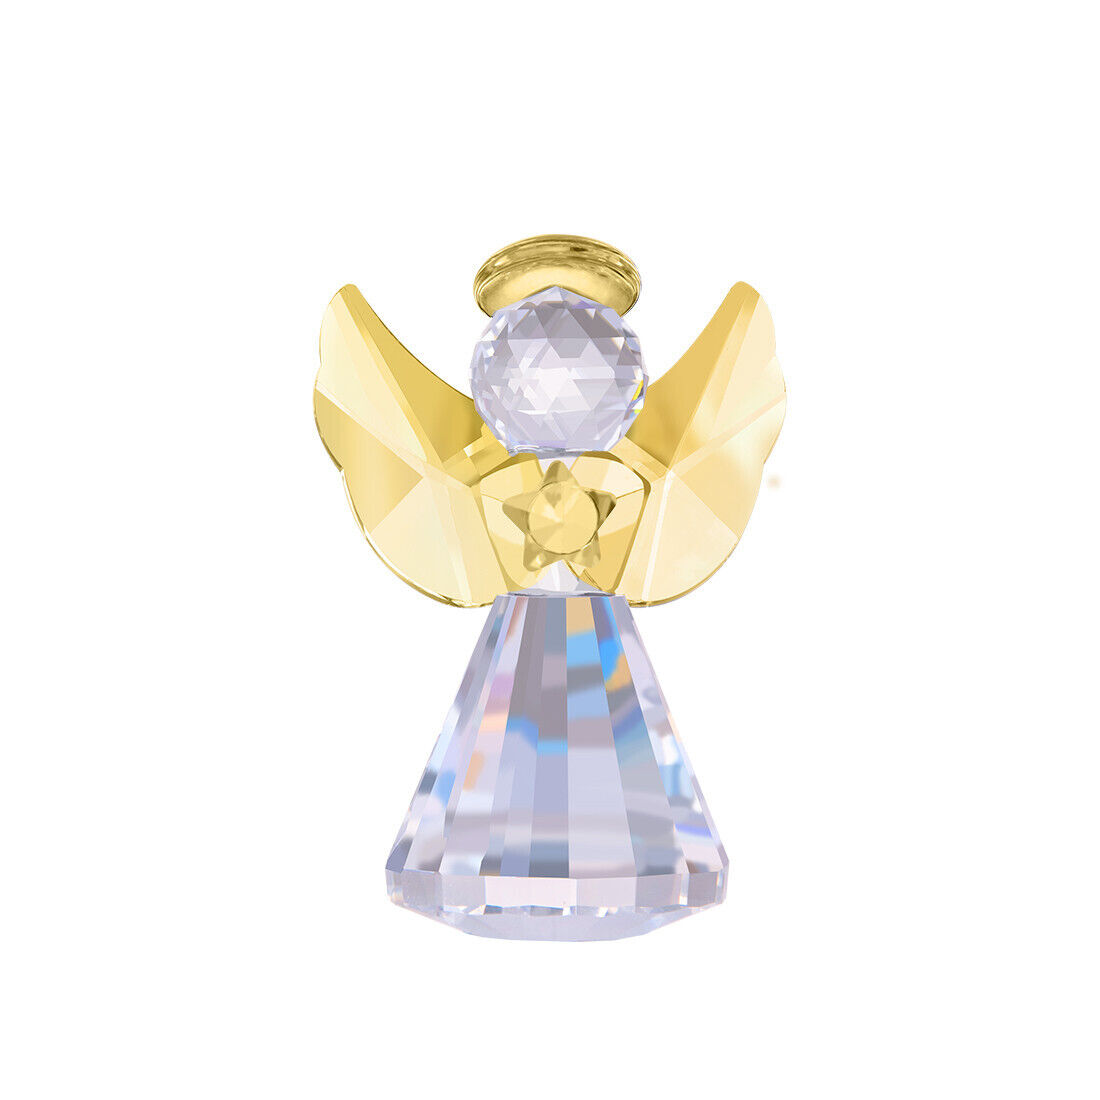 Yellow Crystal Angel Figurine Collectible Glass Angel Ornament Home Decor